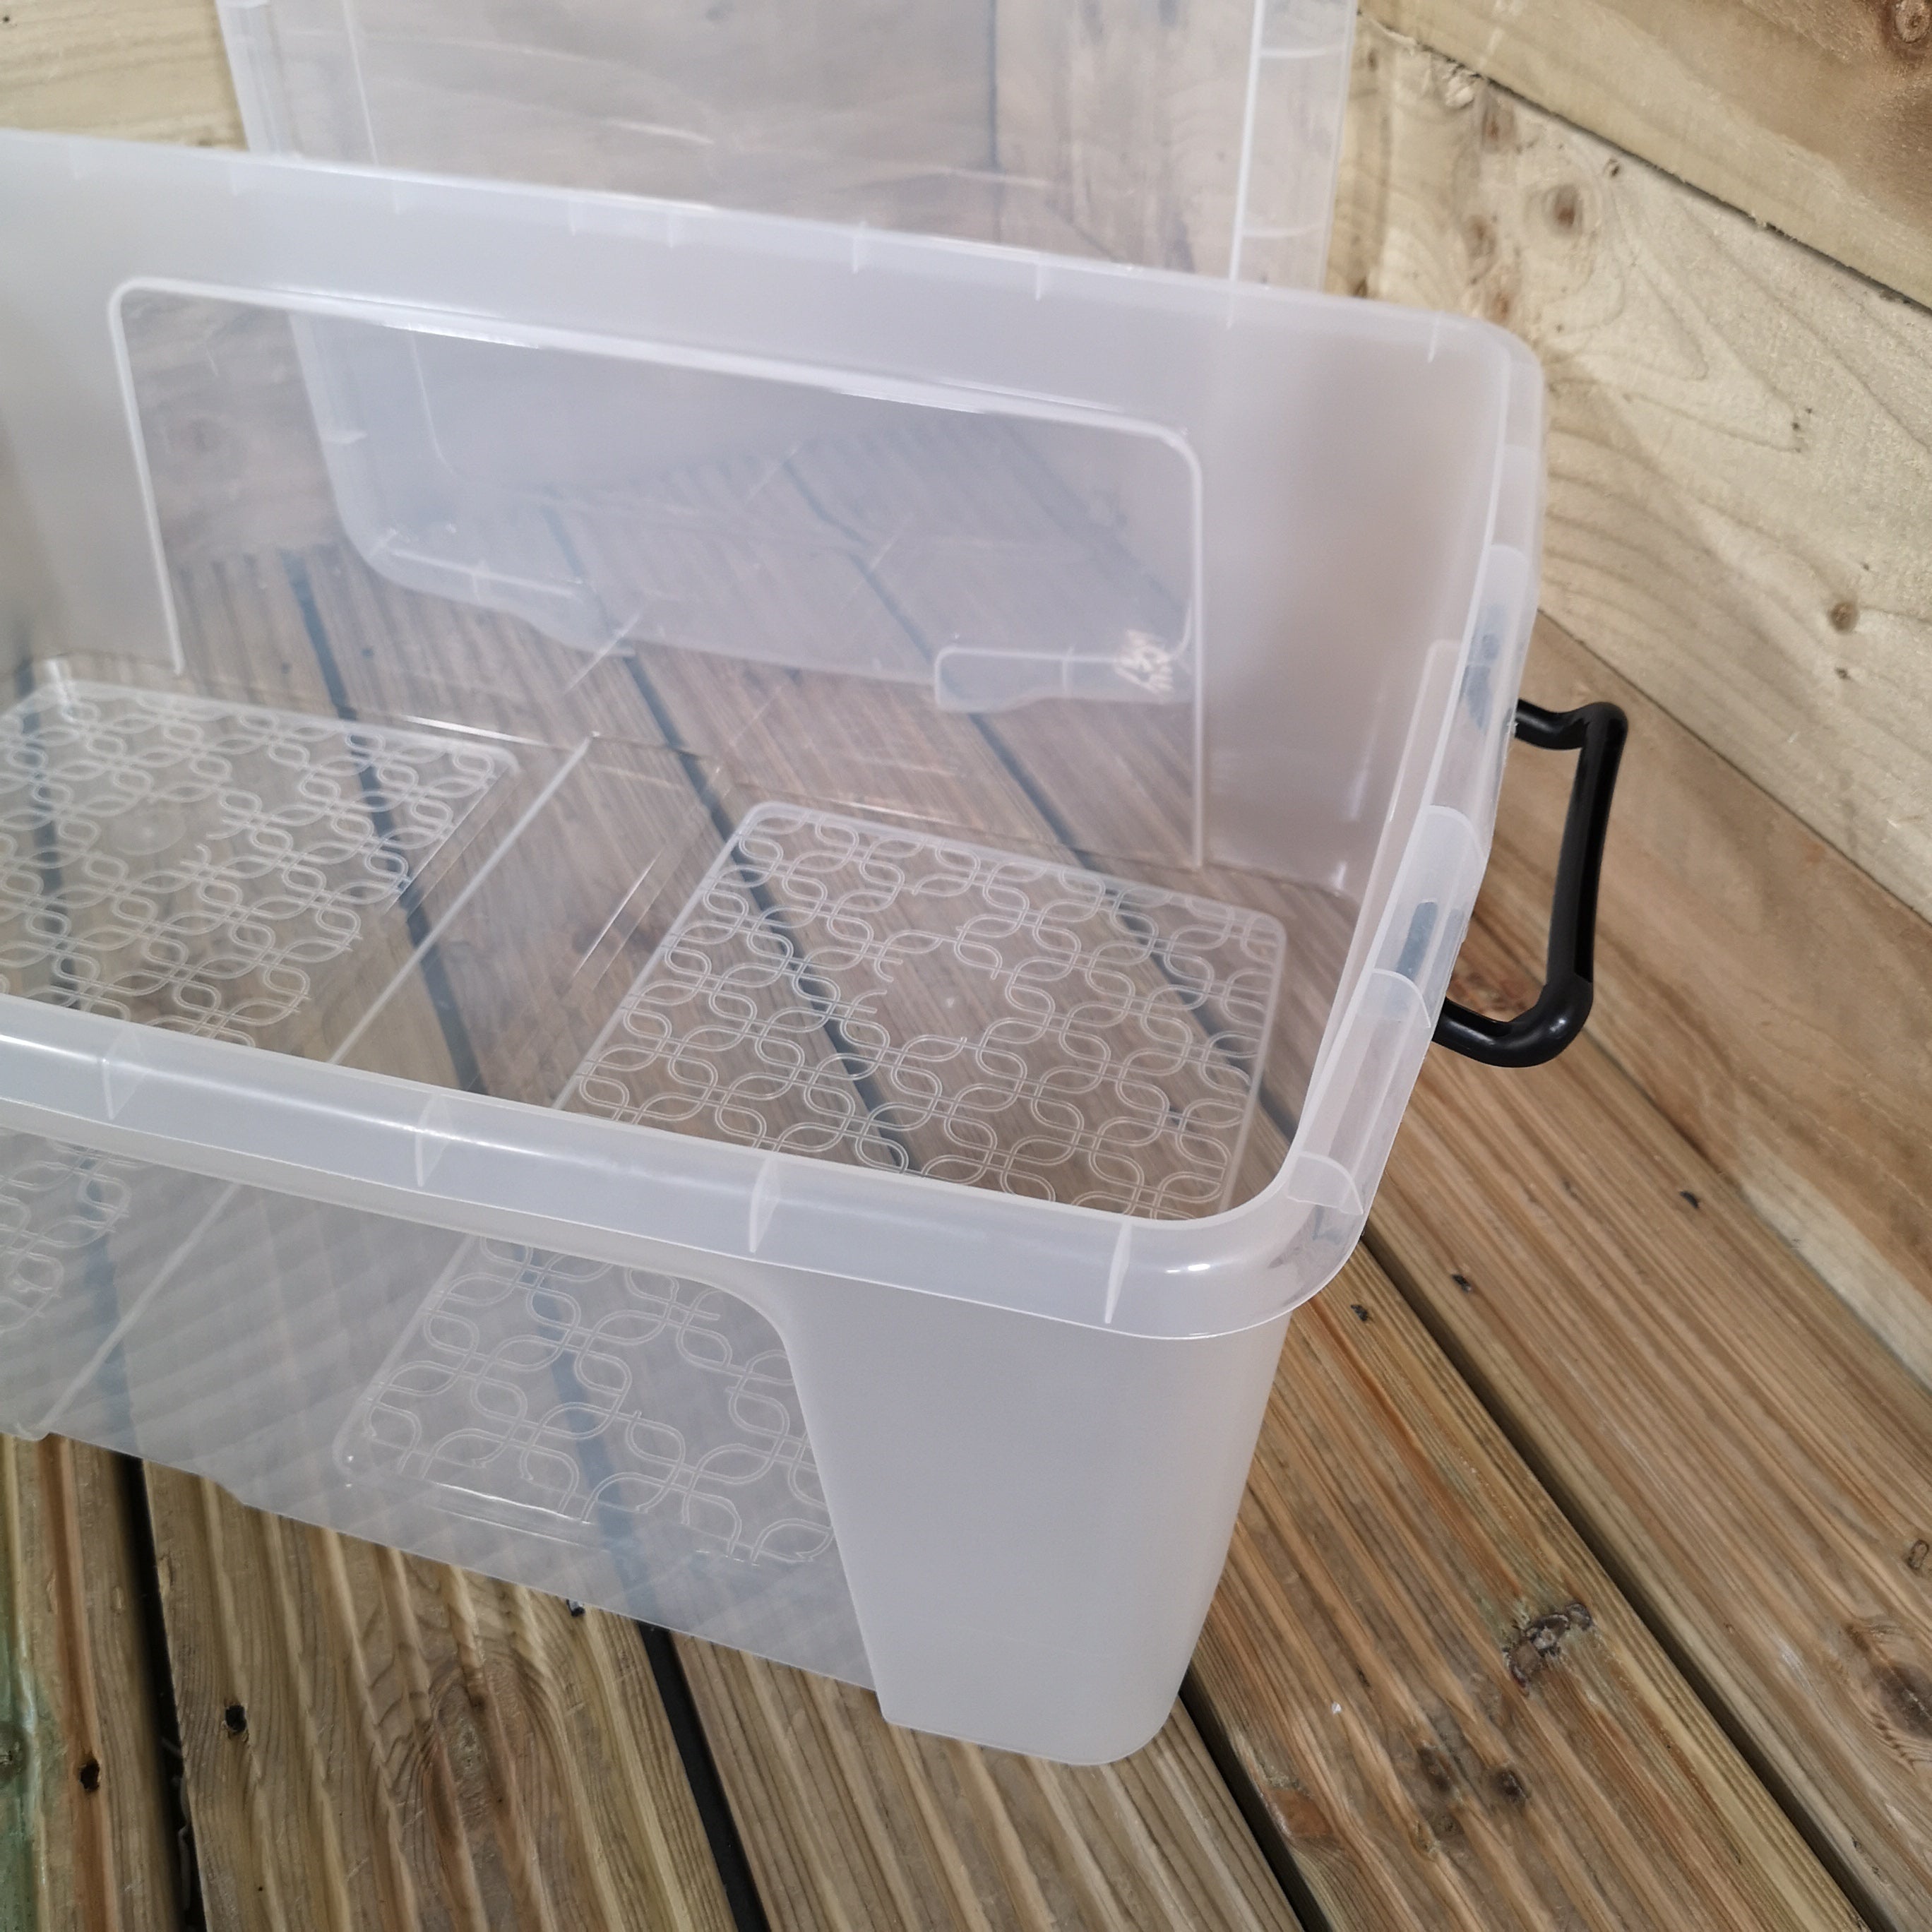 6 x 50L Smart Storage Boxes, Clear with Clear Extra Strong Lids, Stackable and Nestable Design Storage Solution